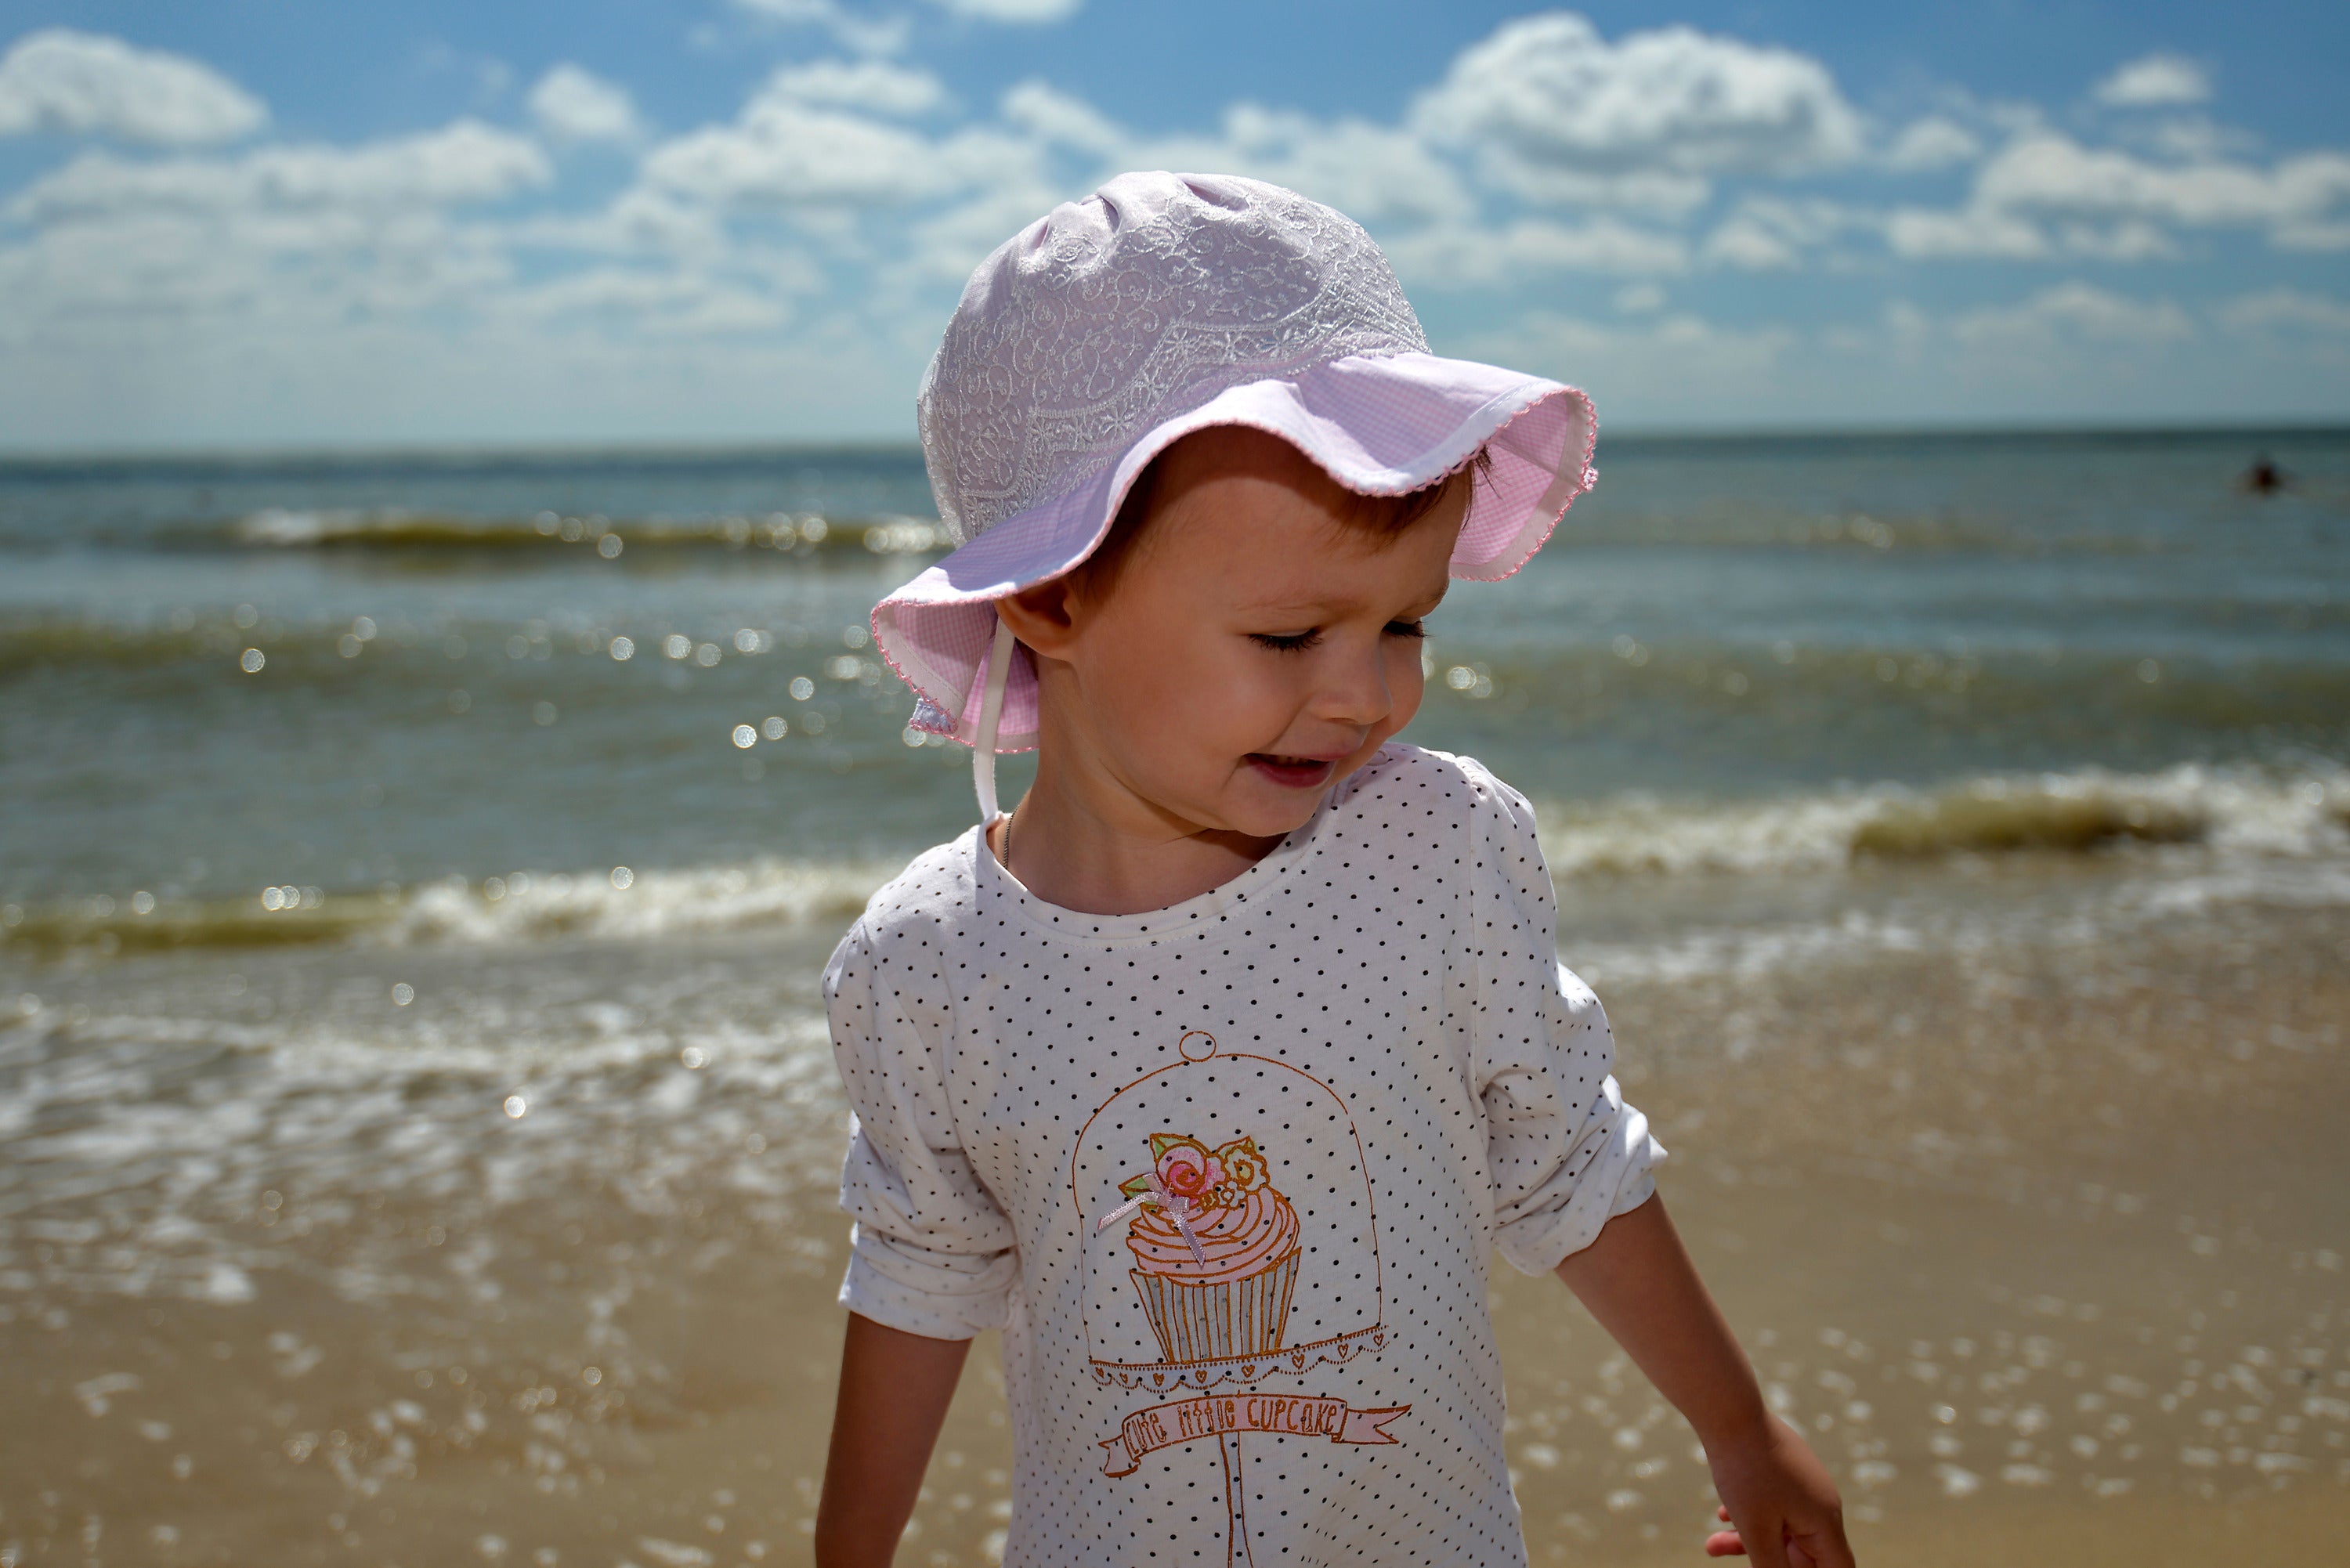 Use protective clothing or hats to prevent baby sunburn